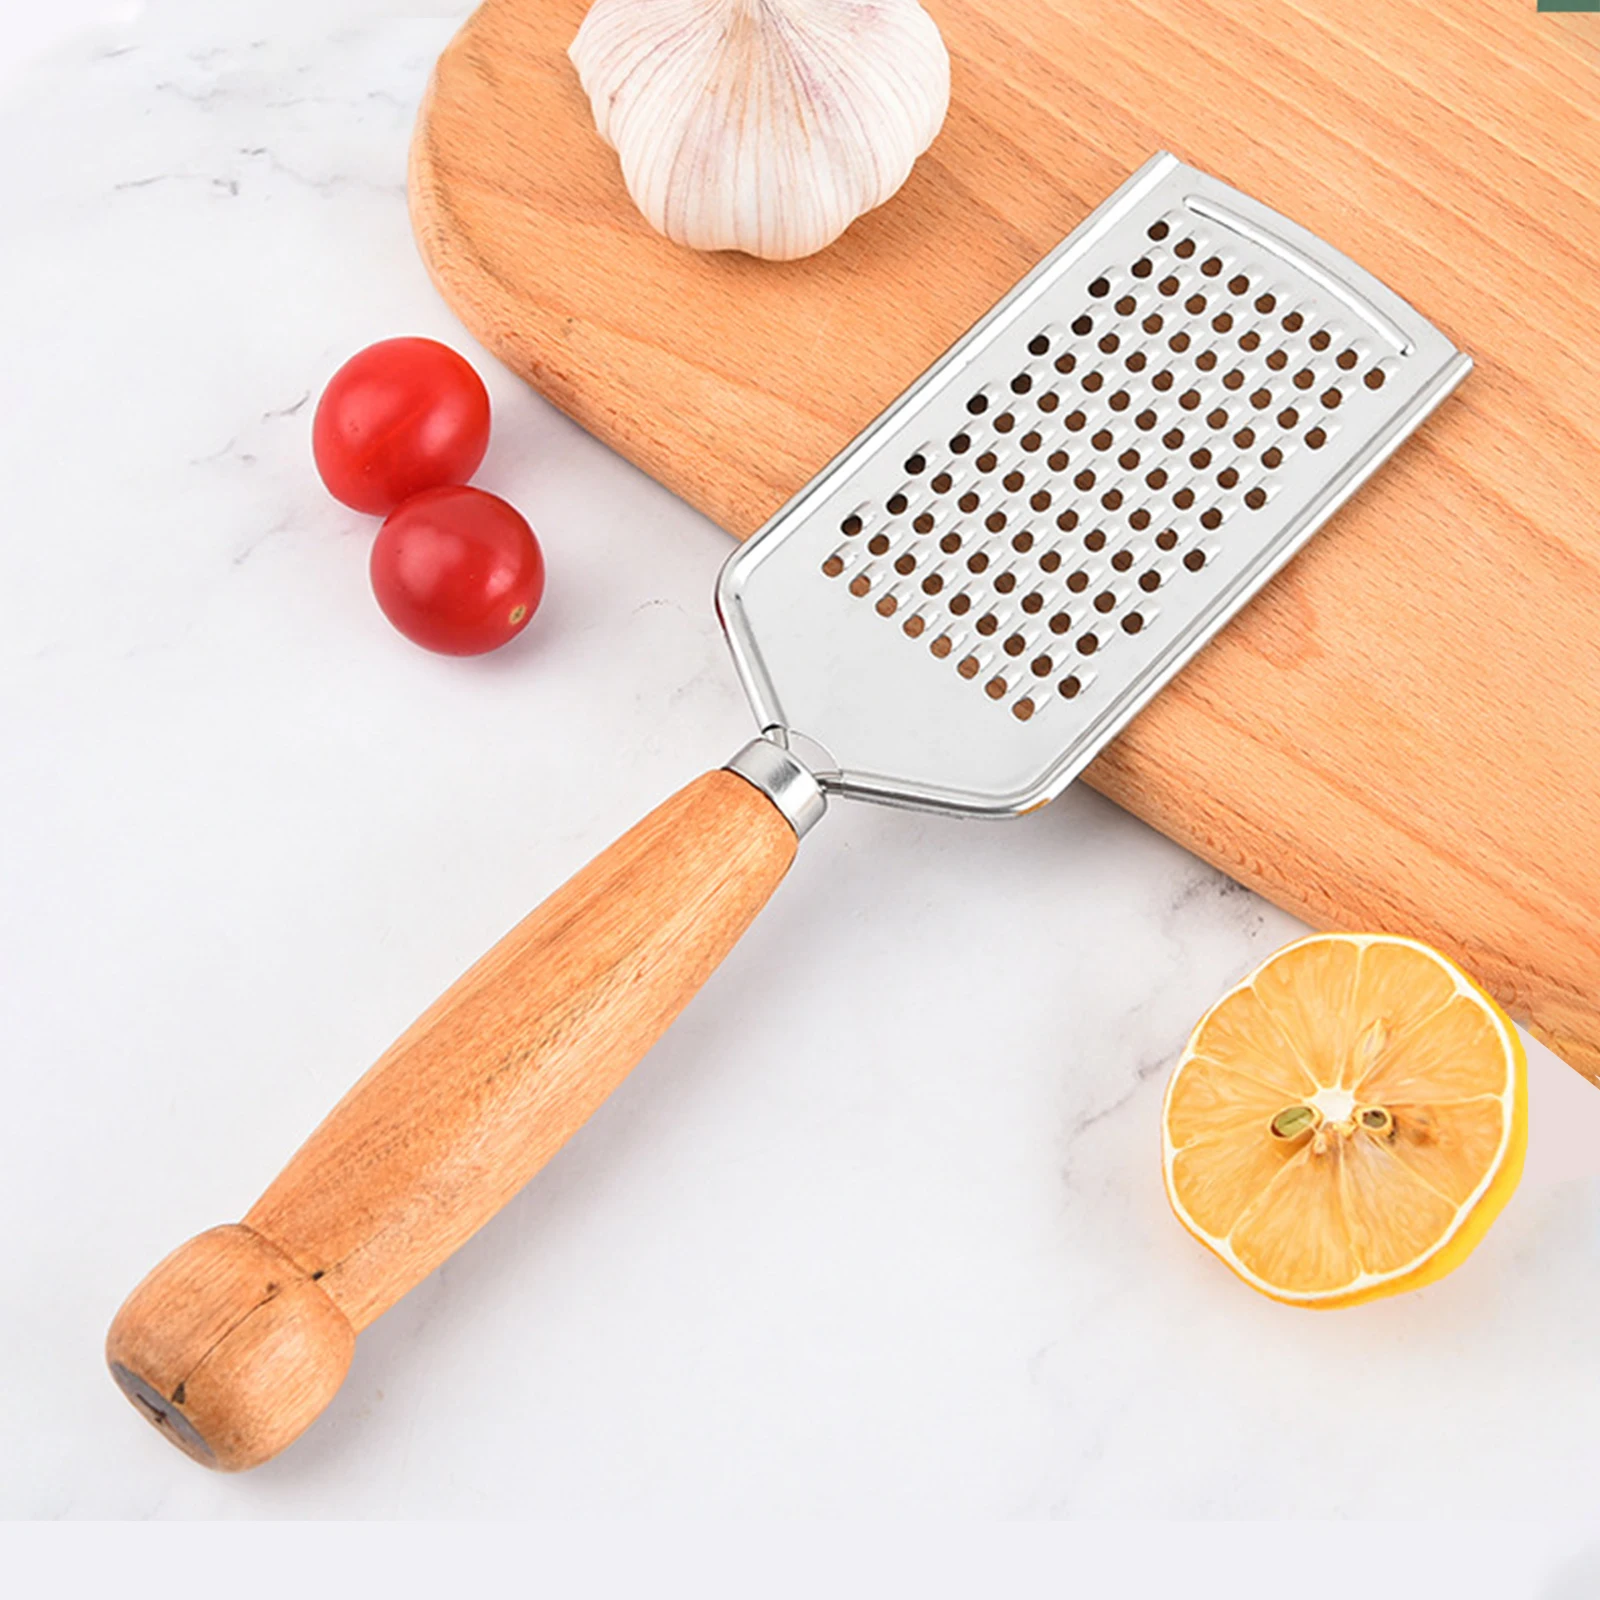 https://ae01.alicdn.com/kf/He3195cf755be48e19b5c6e4d6c97788dK/Stainless-Steel-Handheld-Cheese-Grater-Multi-Purpose-Kitchen-Food-Graters-For-Cheese-Chocolate-Butter-Fruit-Vegetable.jpg